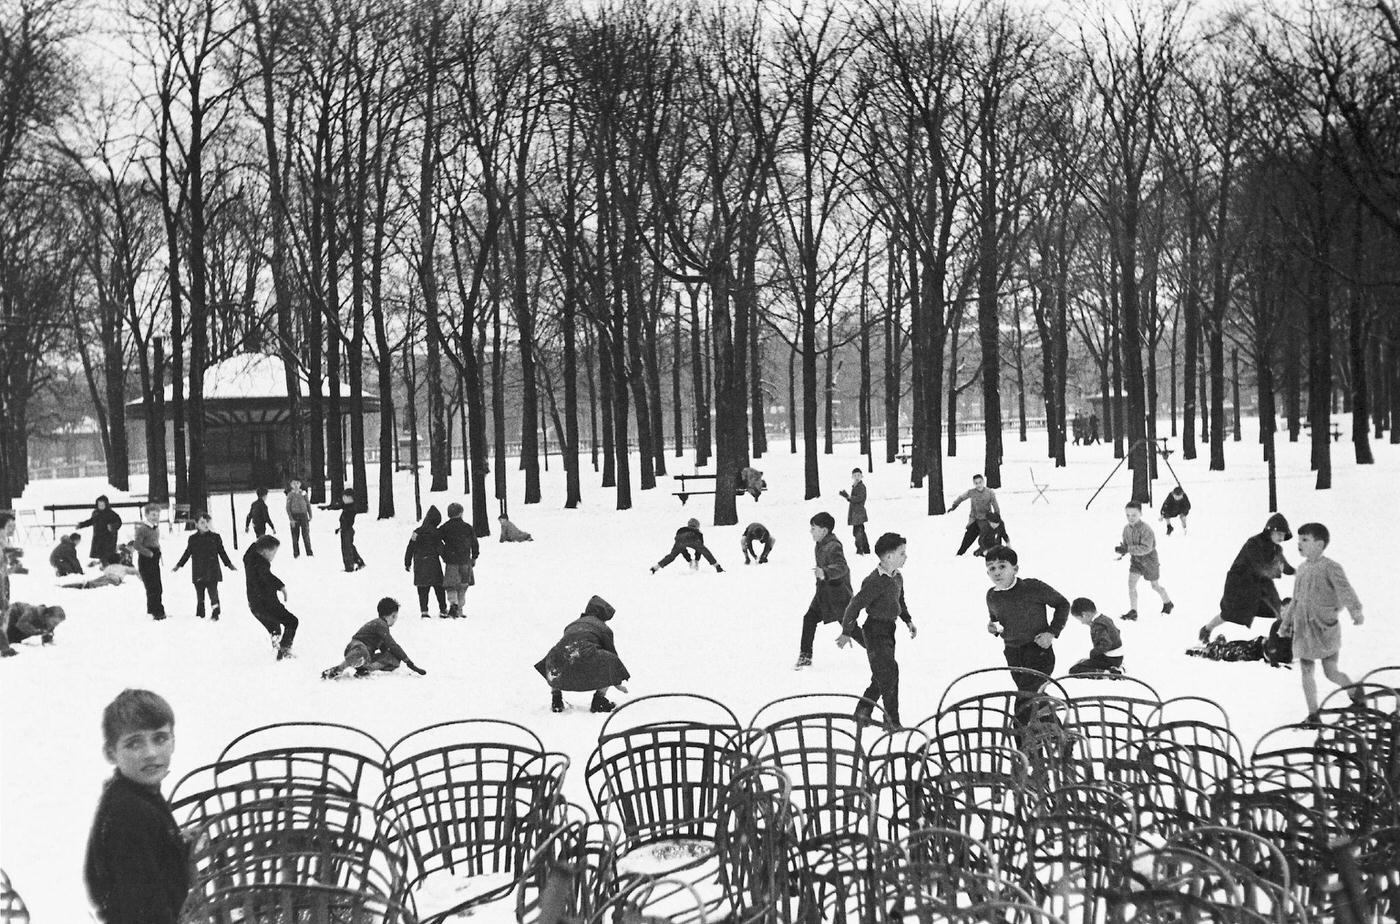 First Snowfall In The Garden Of Luxembourg, Paris, 1955.